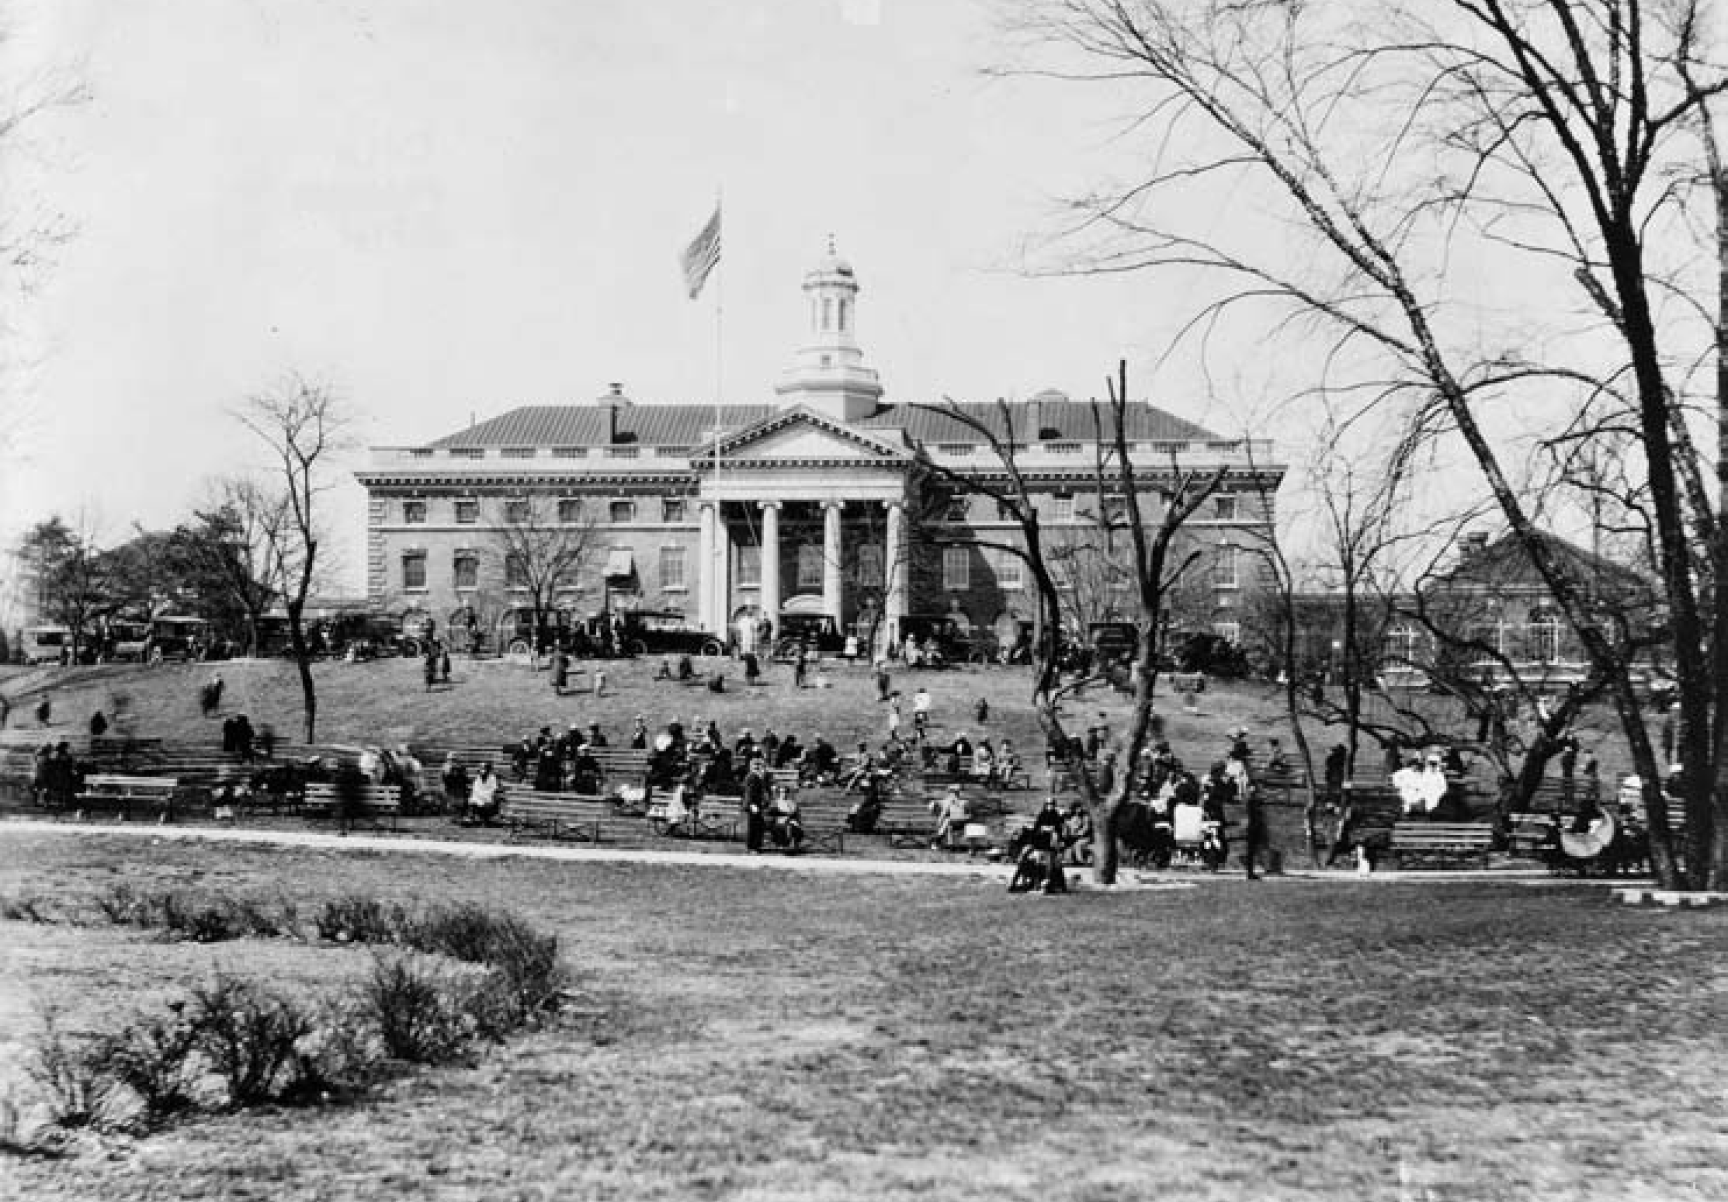 A black and white photo of a large lawn.